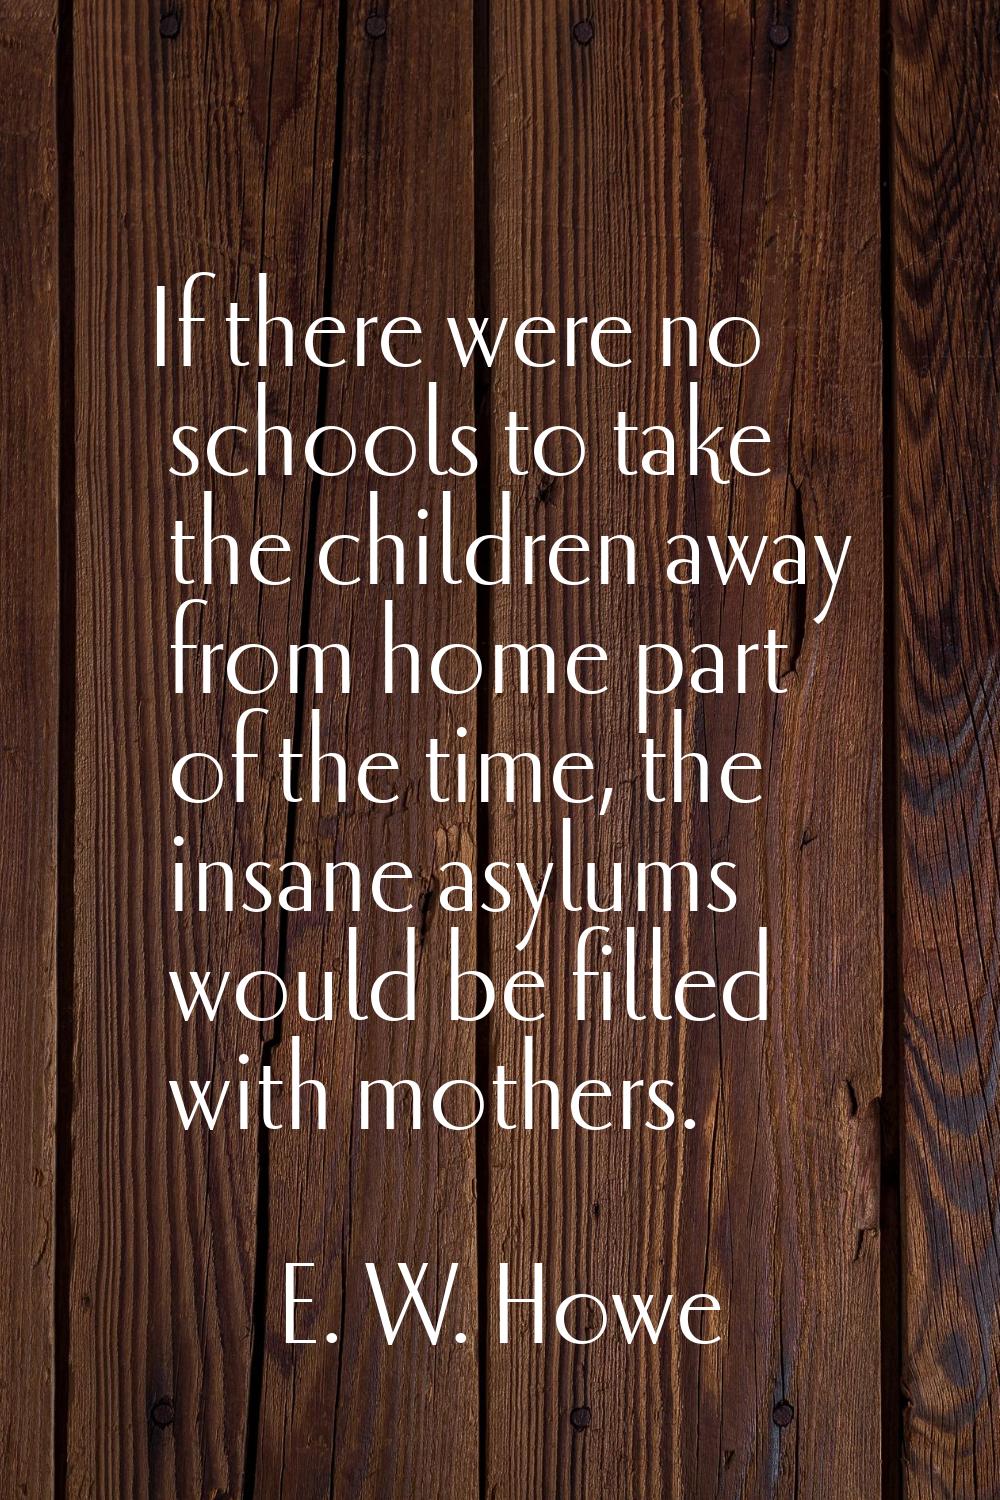 If there were no schools to take the children away from home part of the time, the insane asylums w